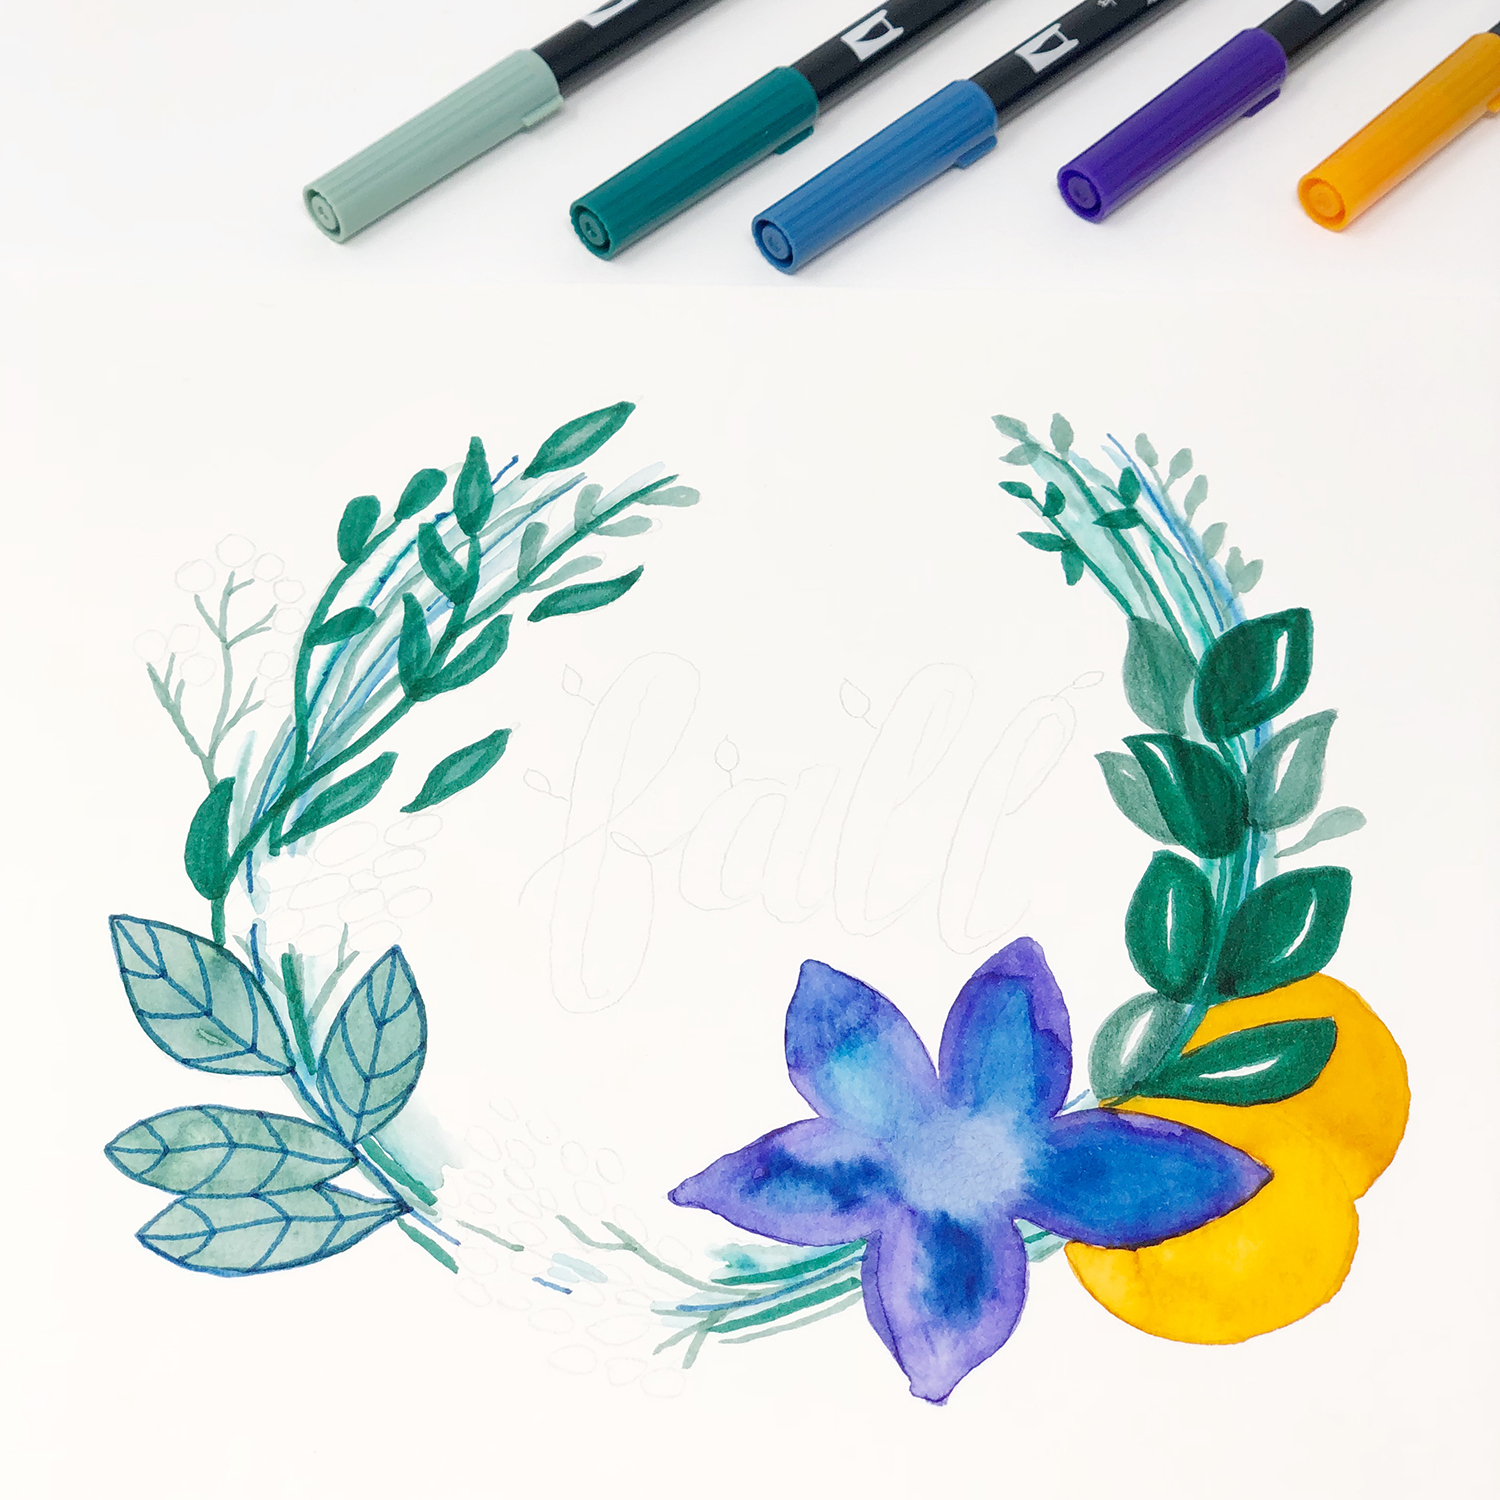 Draw a Fall Wreath in Jewel Tones by Jessica Mack on behalf of Tombow